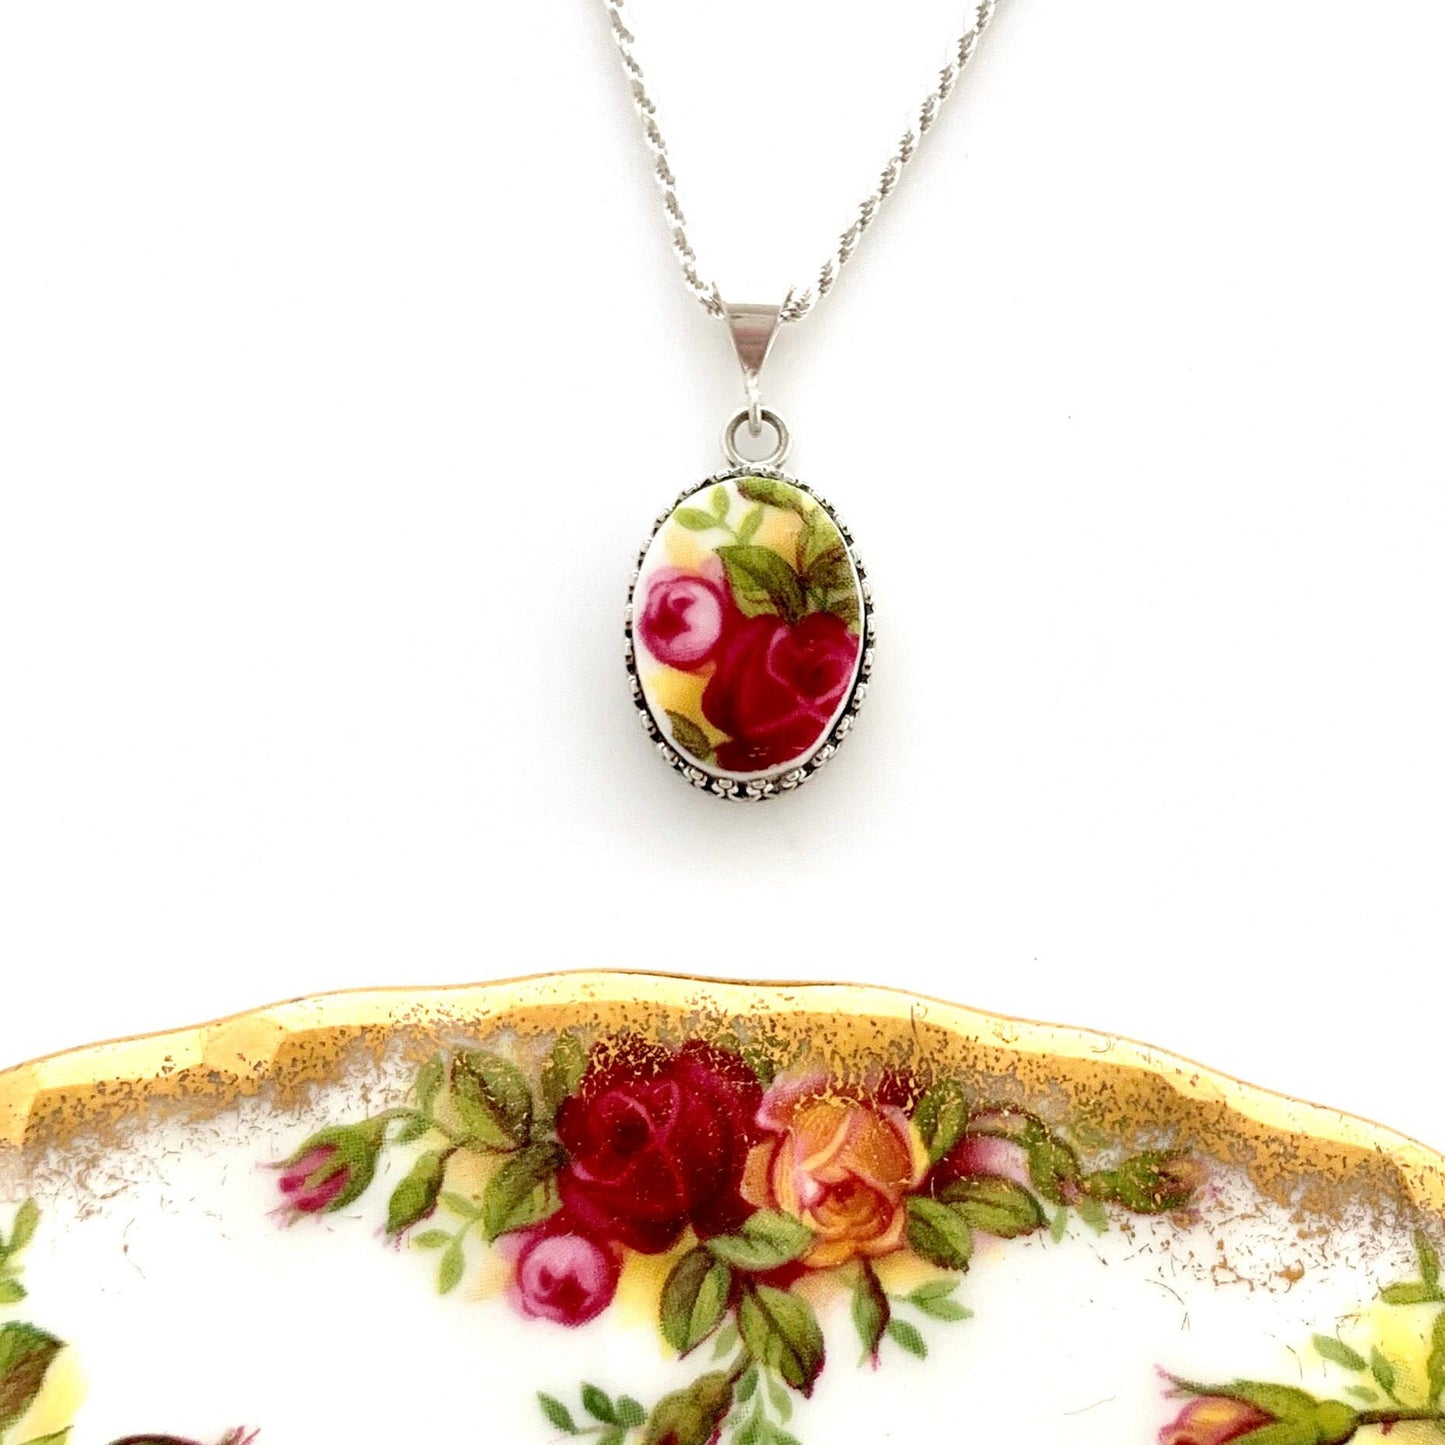 Royal Albert Old Country Roses Vintage China Necklace Unique Birthday Gifts for Women Broken China Jewelry  Gifts